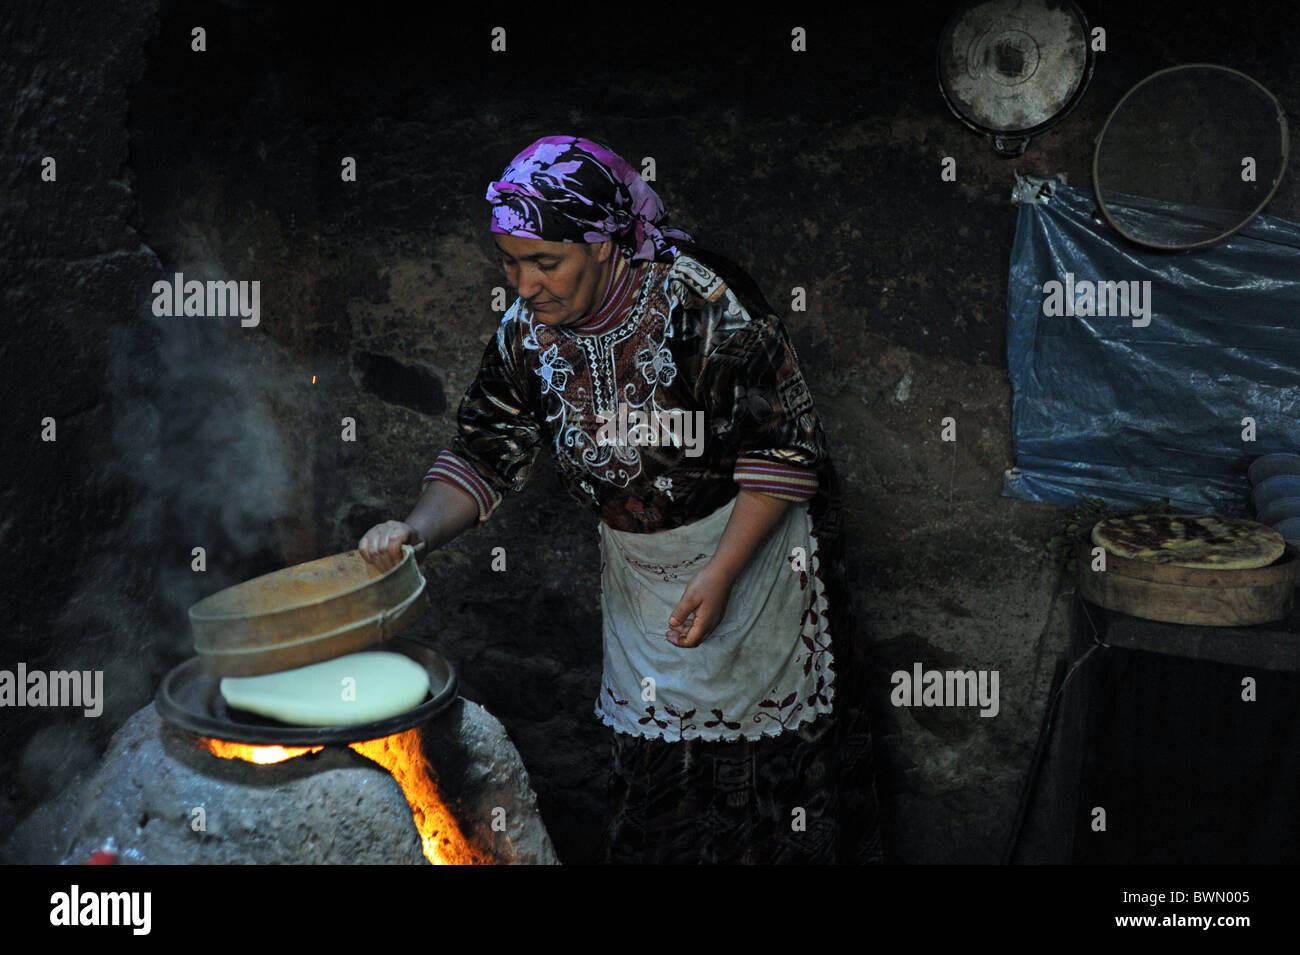 Marrakesh Morocco 2010 - Traditional berber home with women making tea and bread in the Ourika Valley at the Atlas Mountains Stock Photo